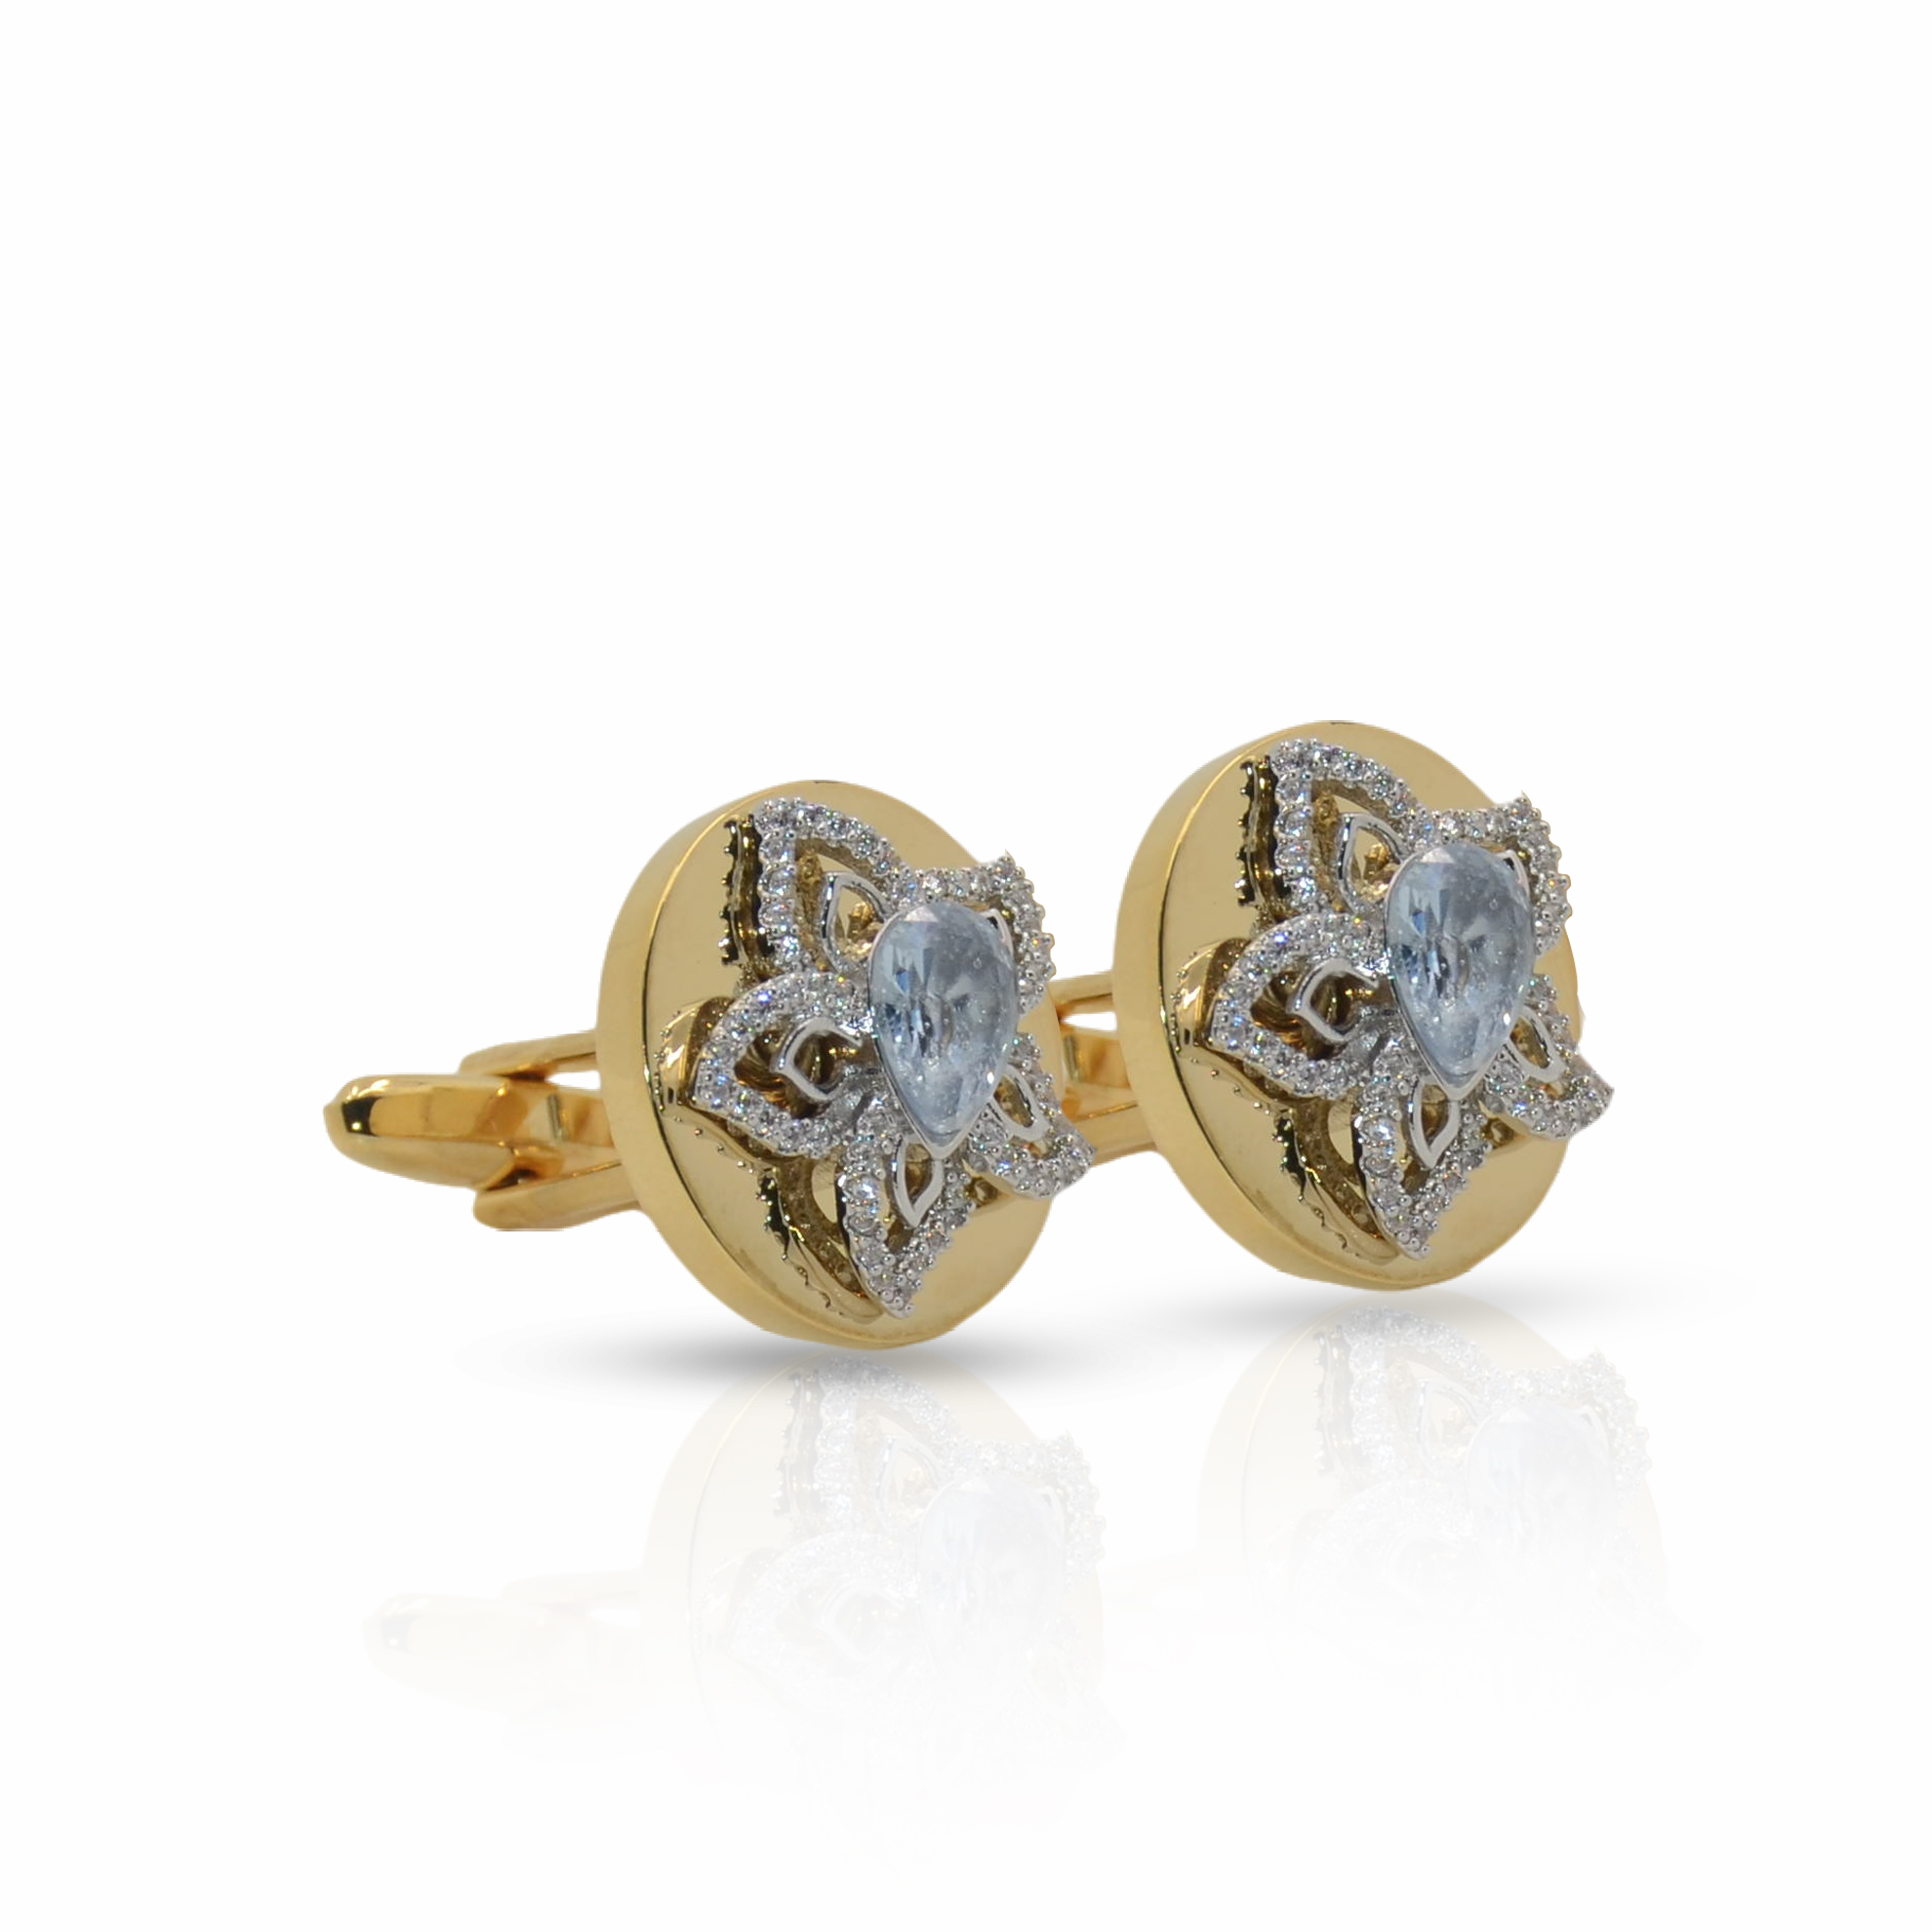 Cufflers Limited Edition Gold Round Cufflinks CU-5006 with Free Gift Box